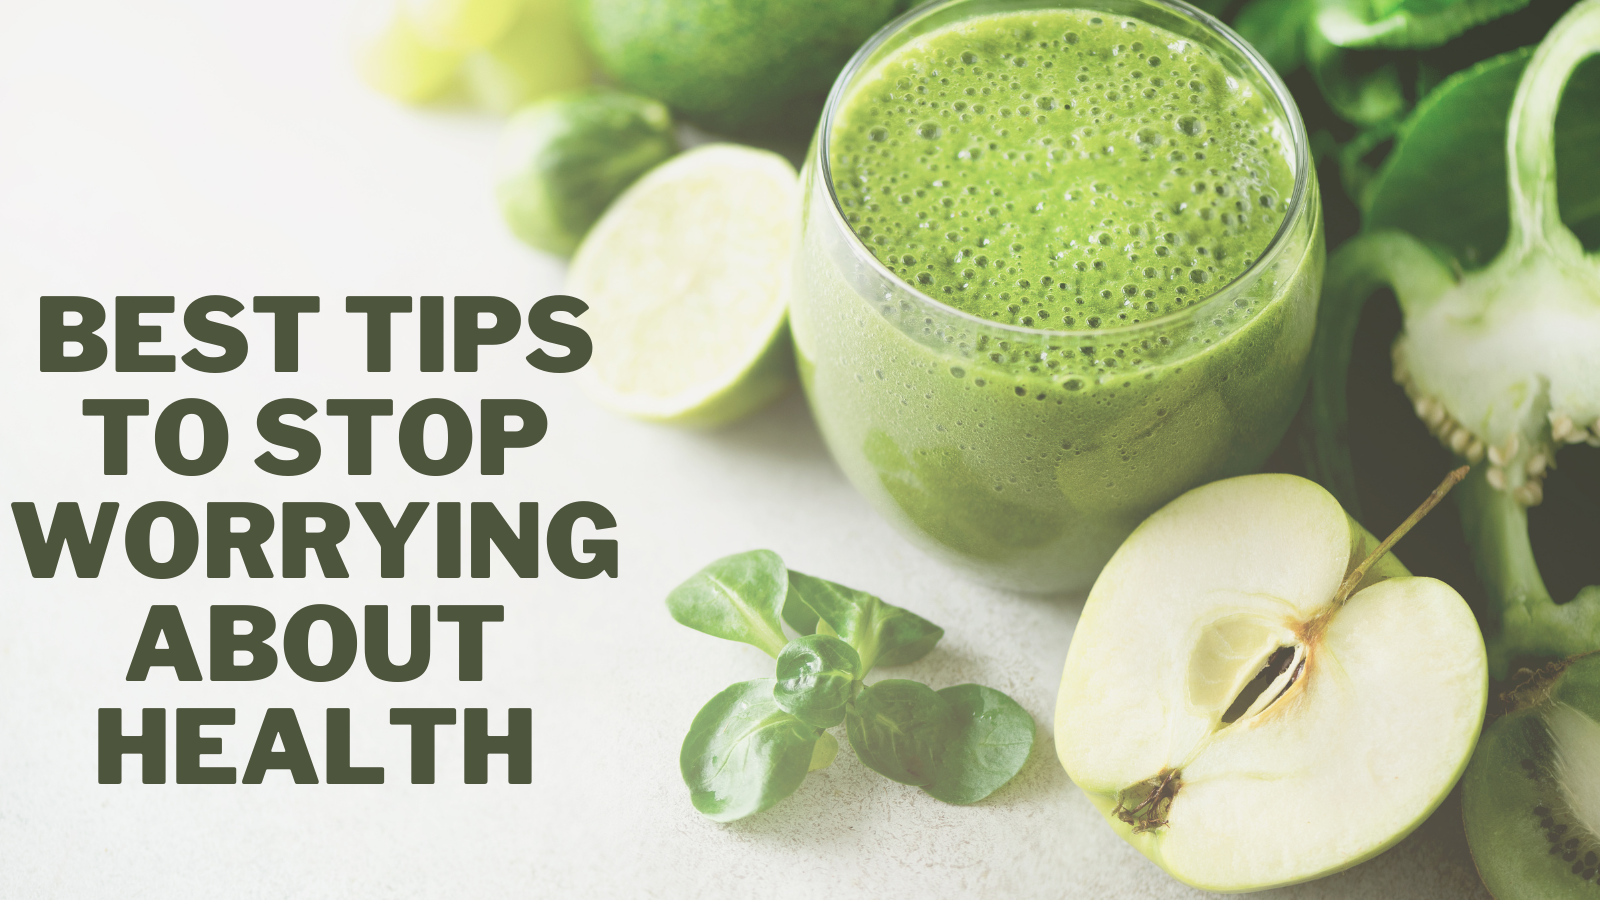 Best Tips To Stop Worrying About Health